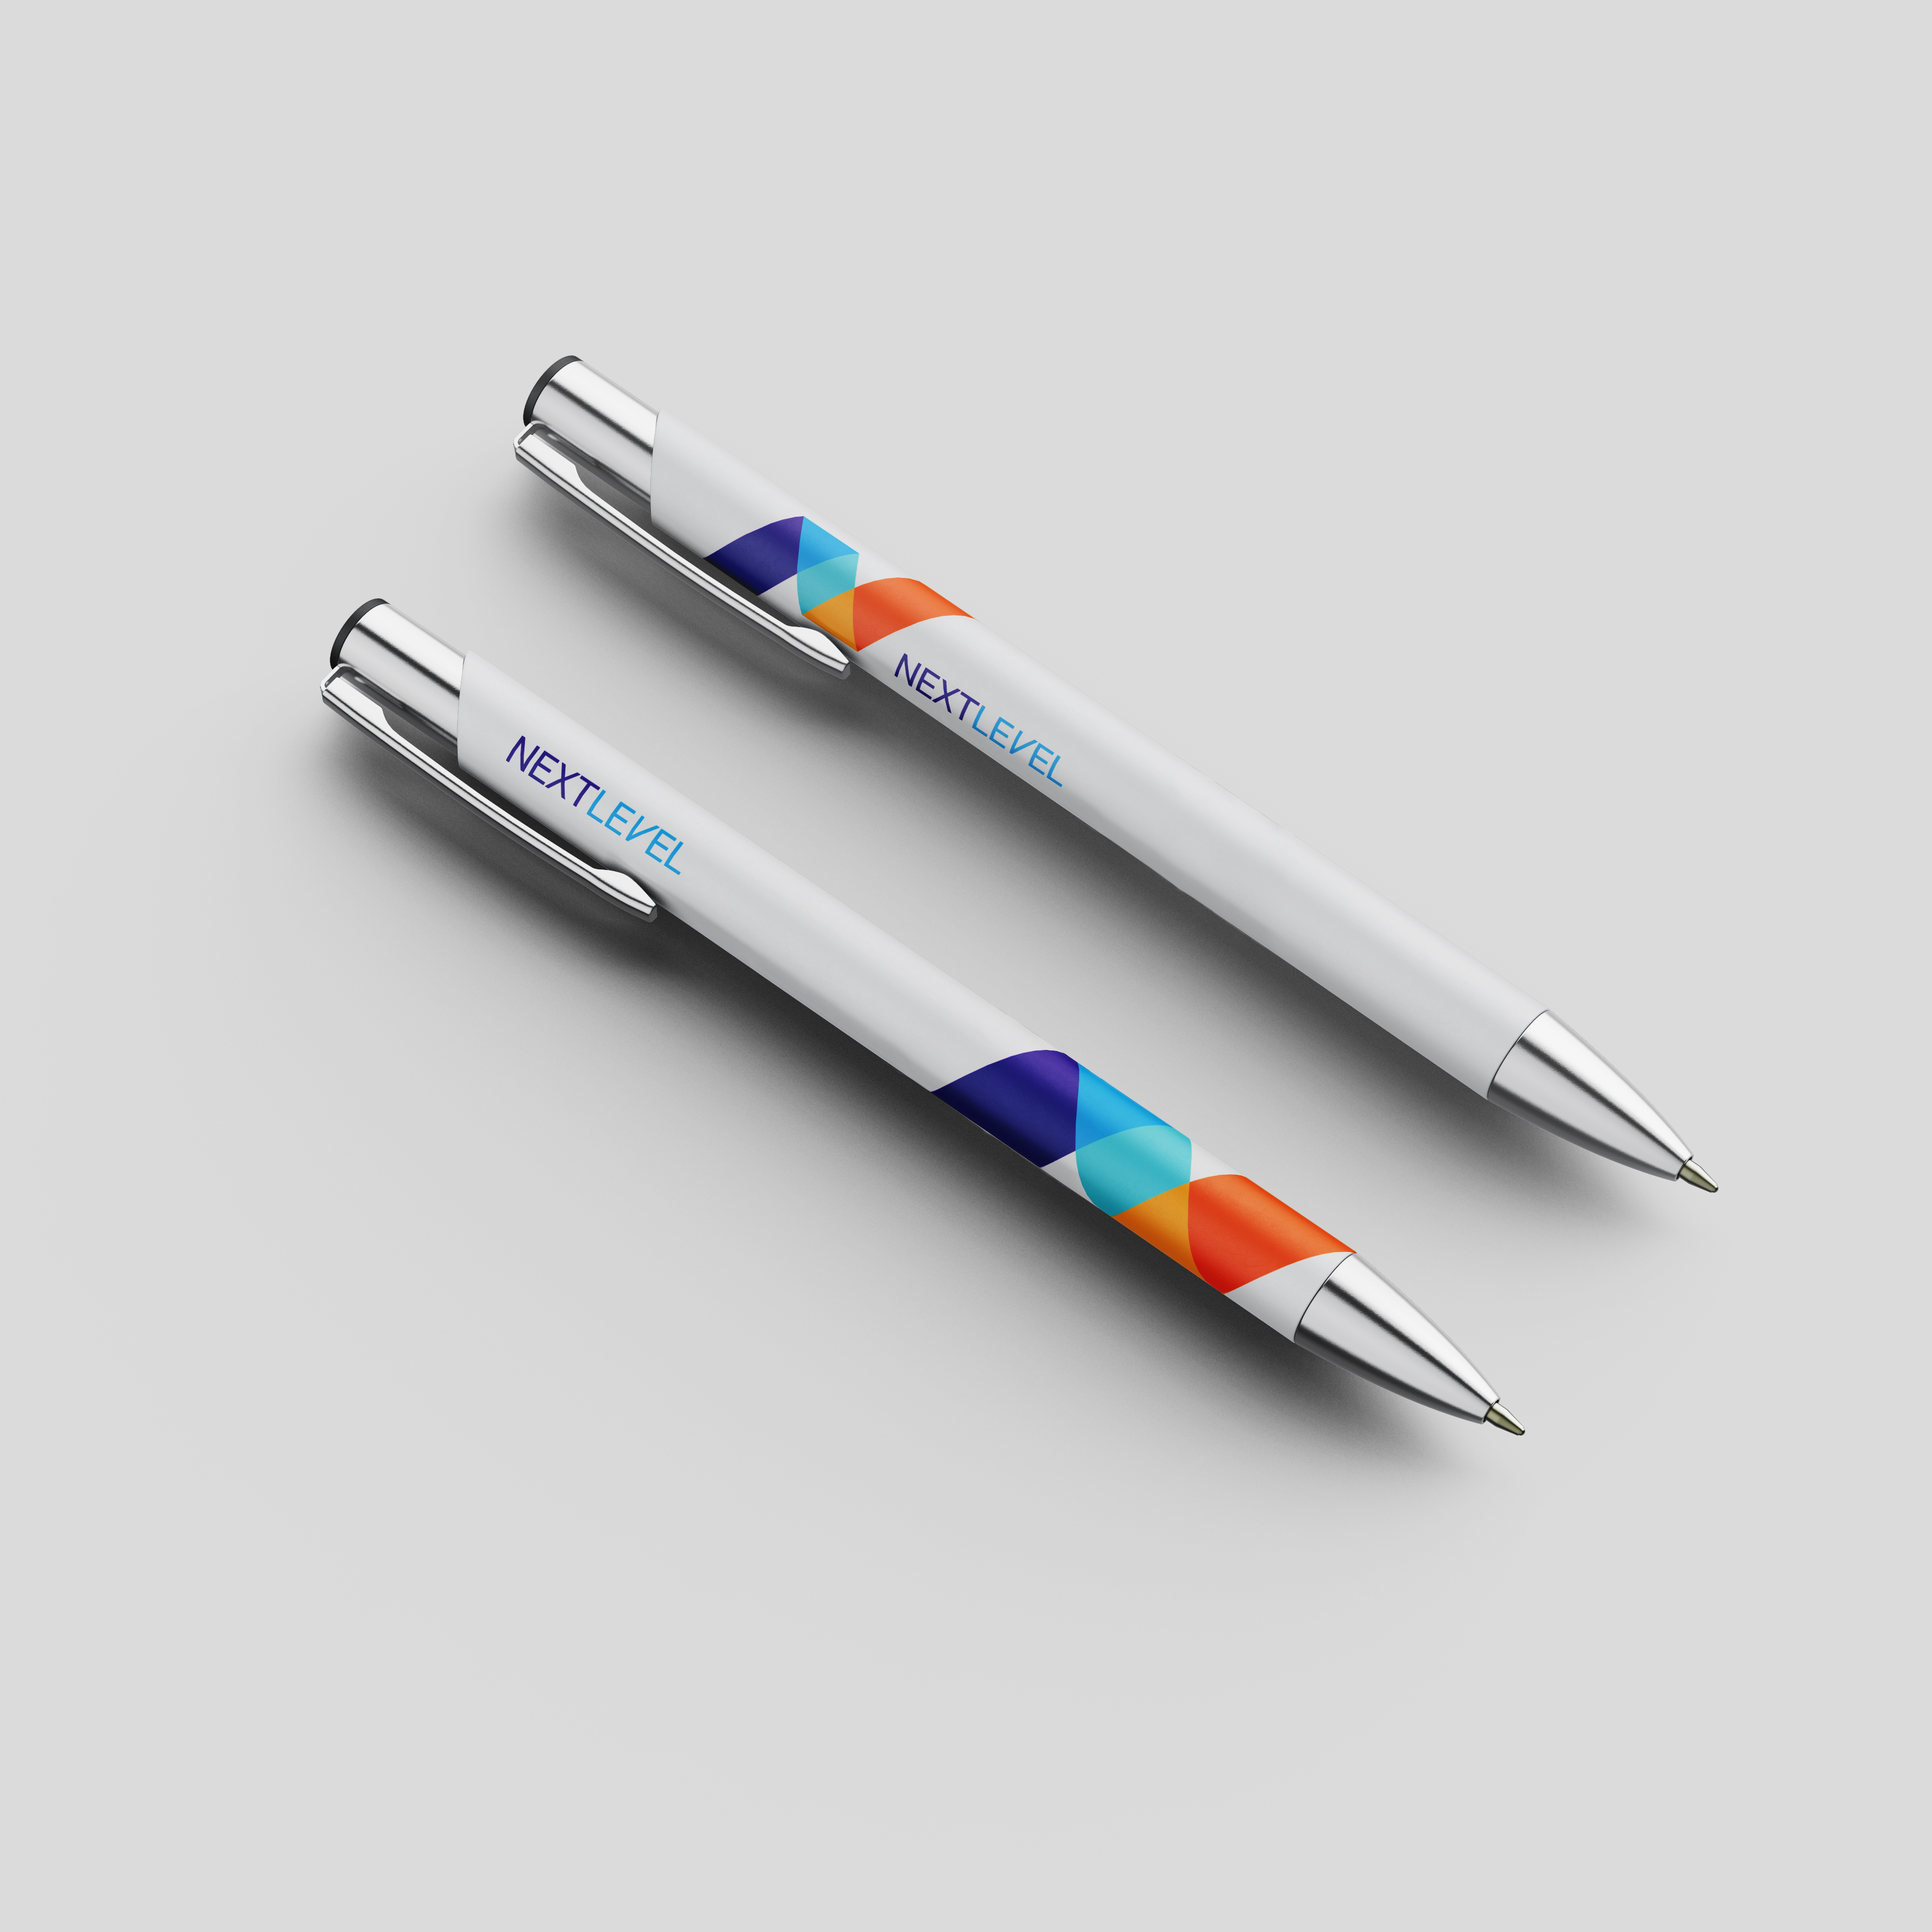 2 pens with the NBCU Next Level logo on them